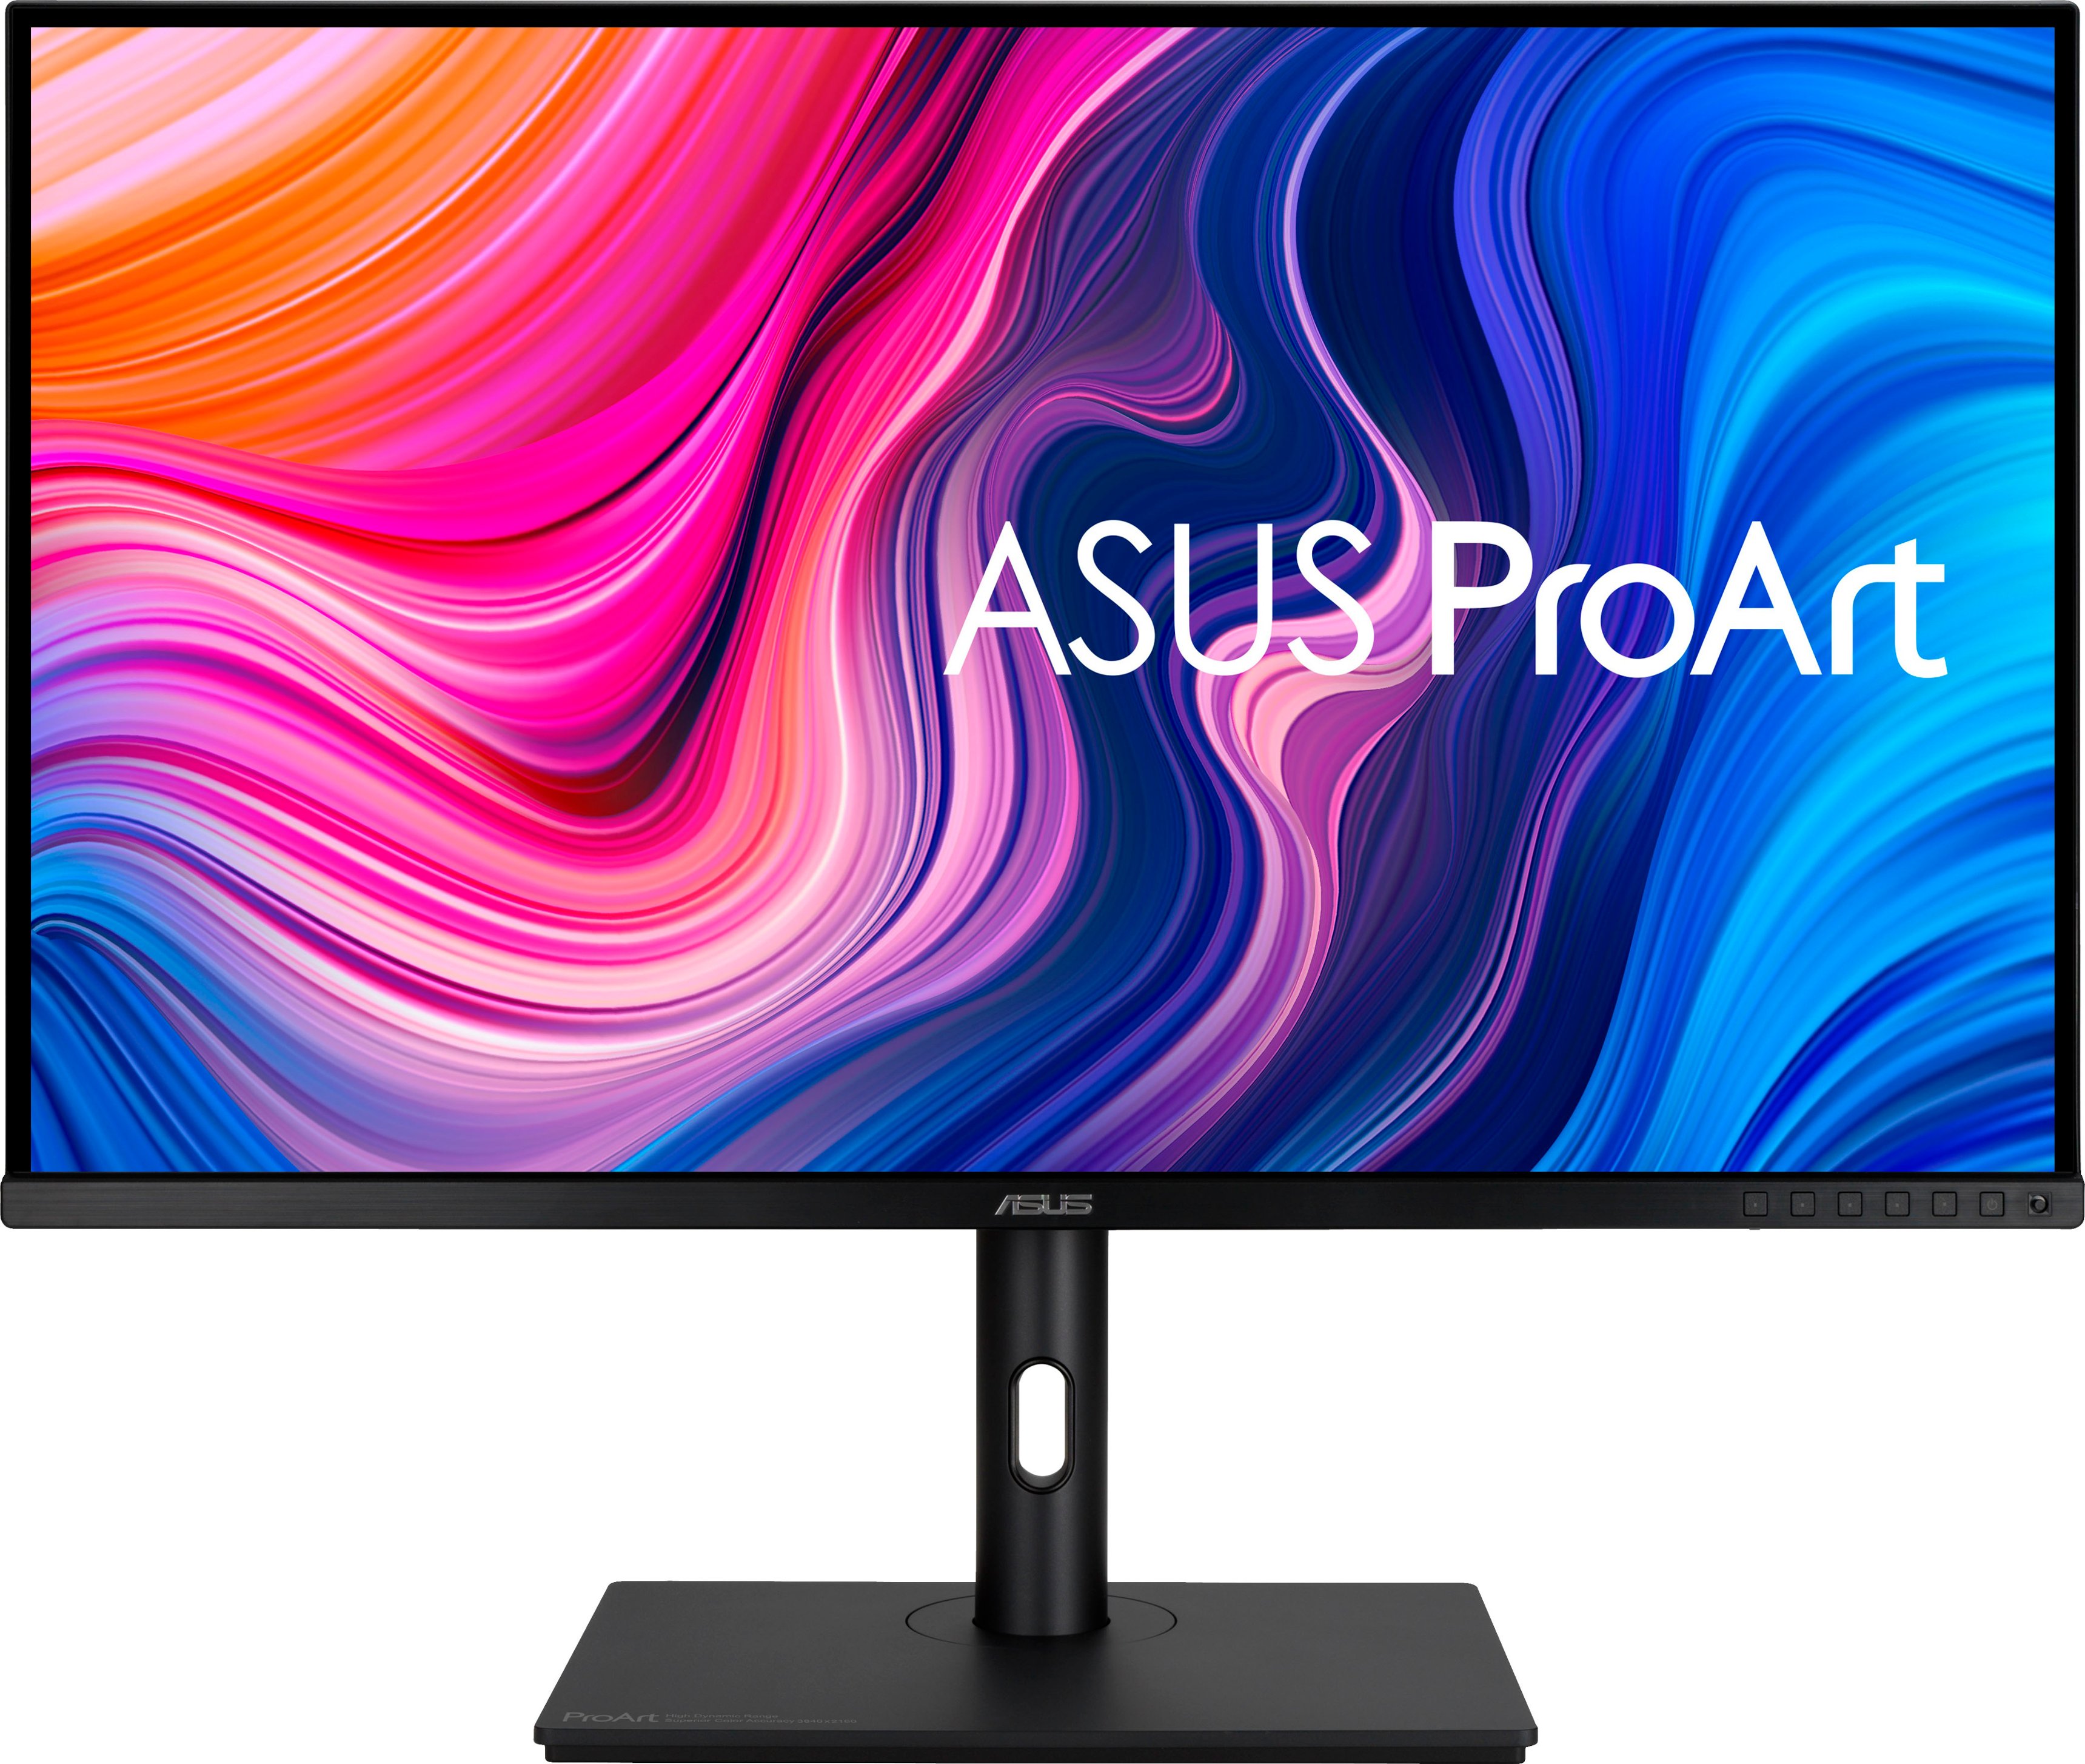 ASUS ProArt 32" IPS LED 4K Monitor with USB-C and Height - Best Buy